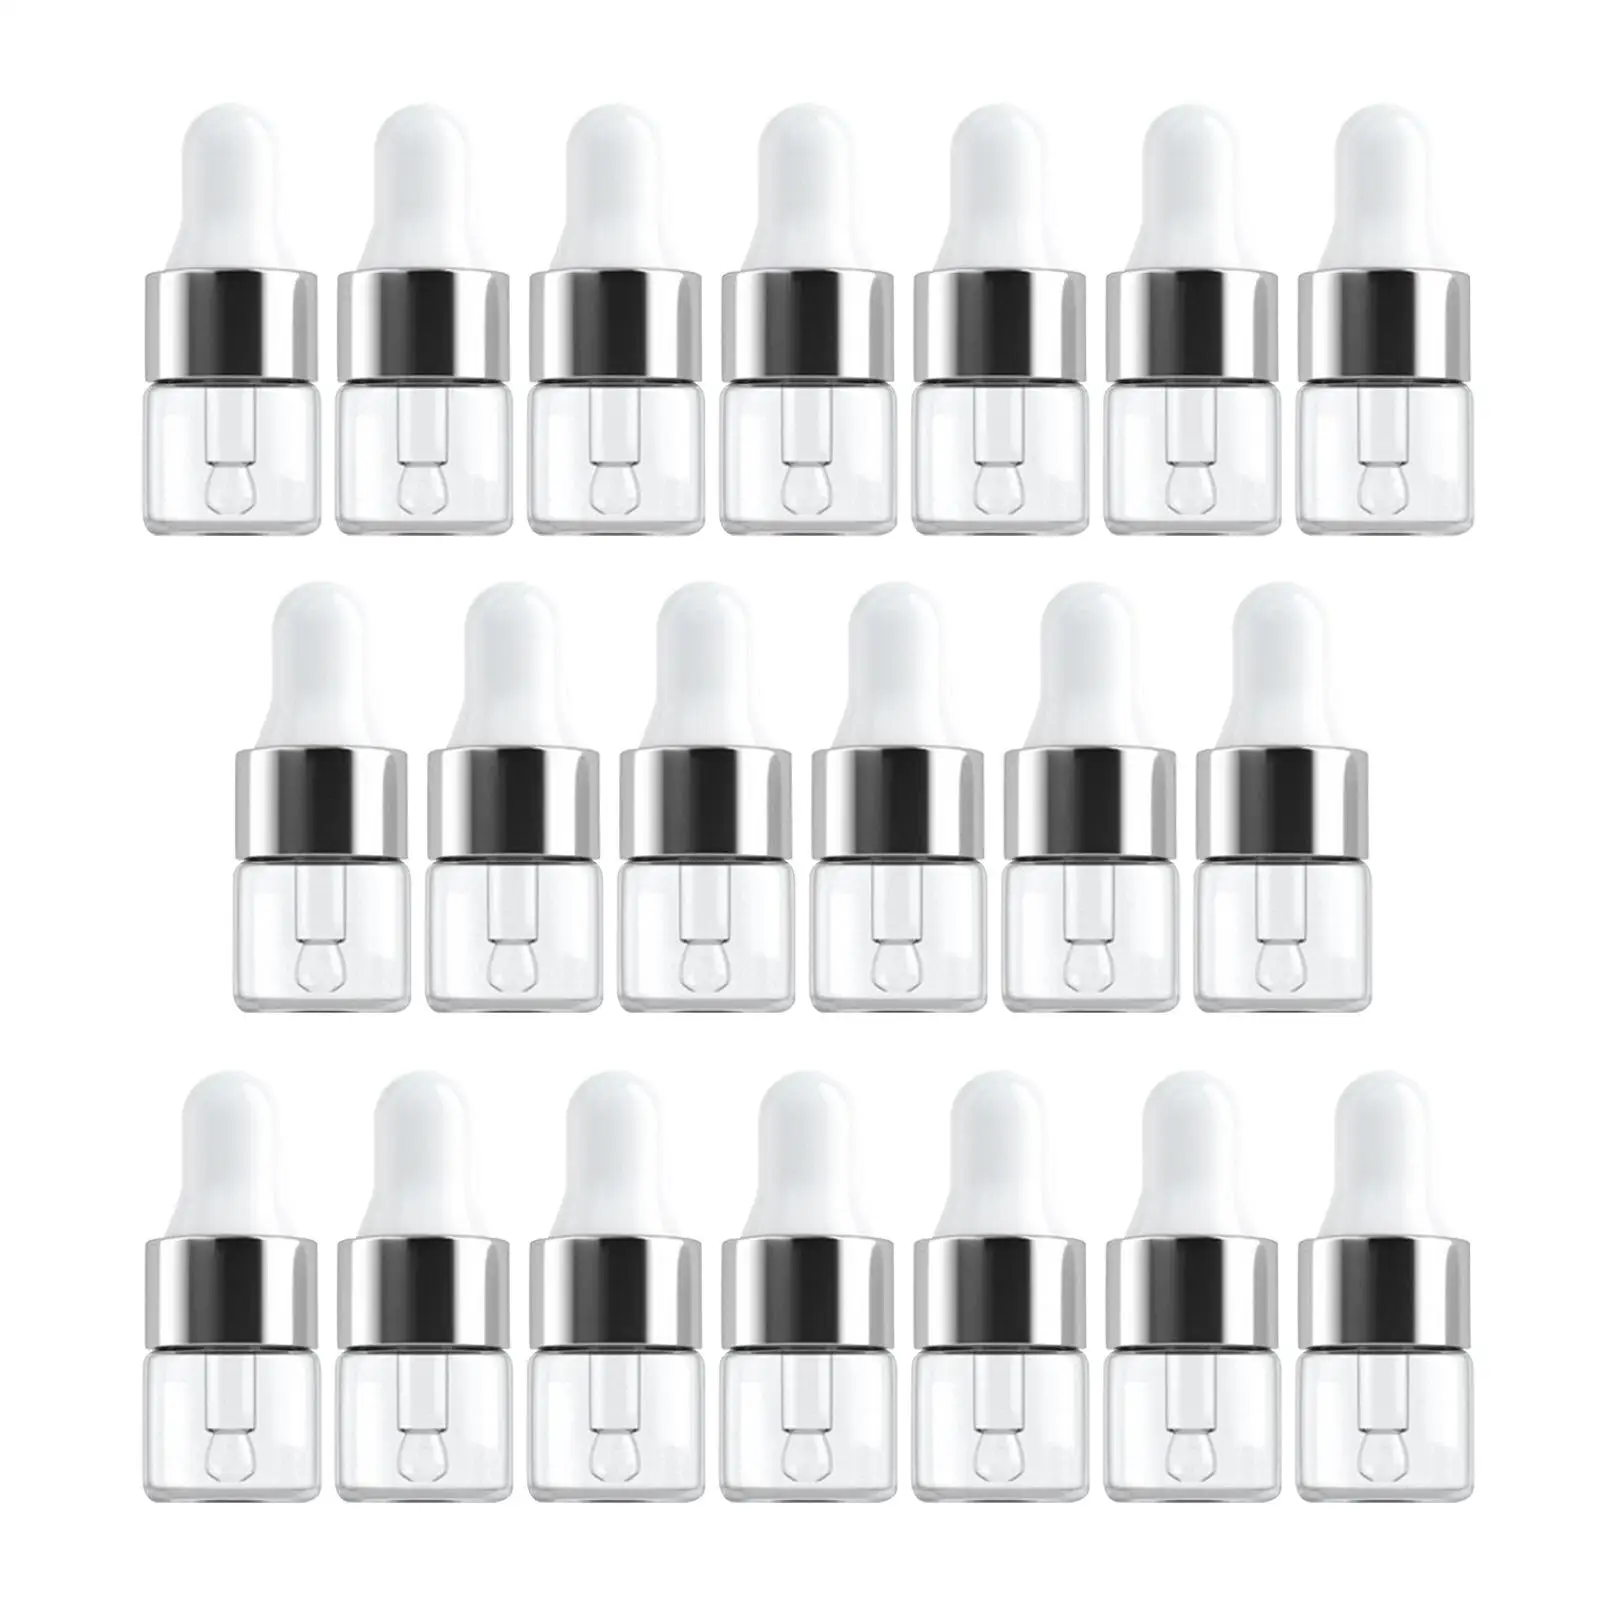 20x Empty Essential Oil Bottle Refillable Oil Containers Lightweight Glass Bottle Dropper Bottles for Travel Home Office Massage